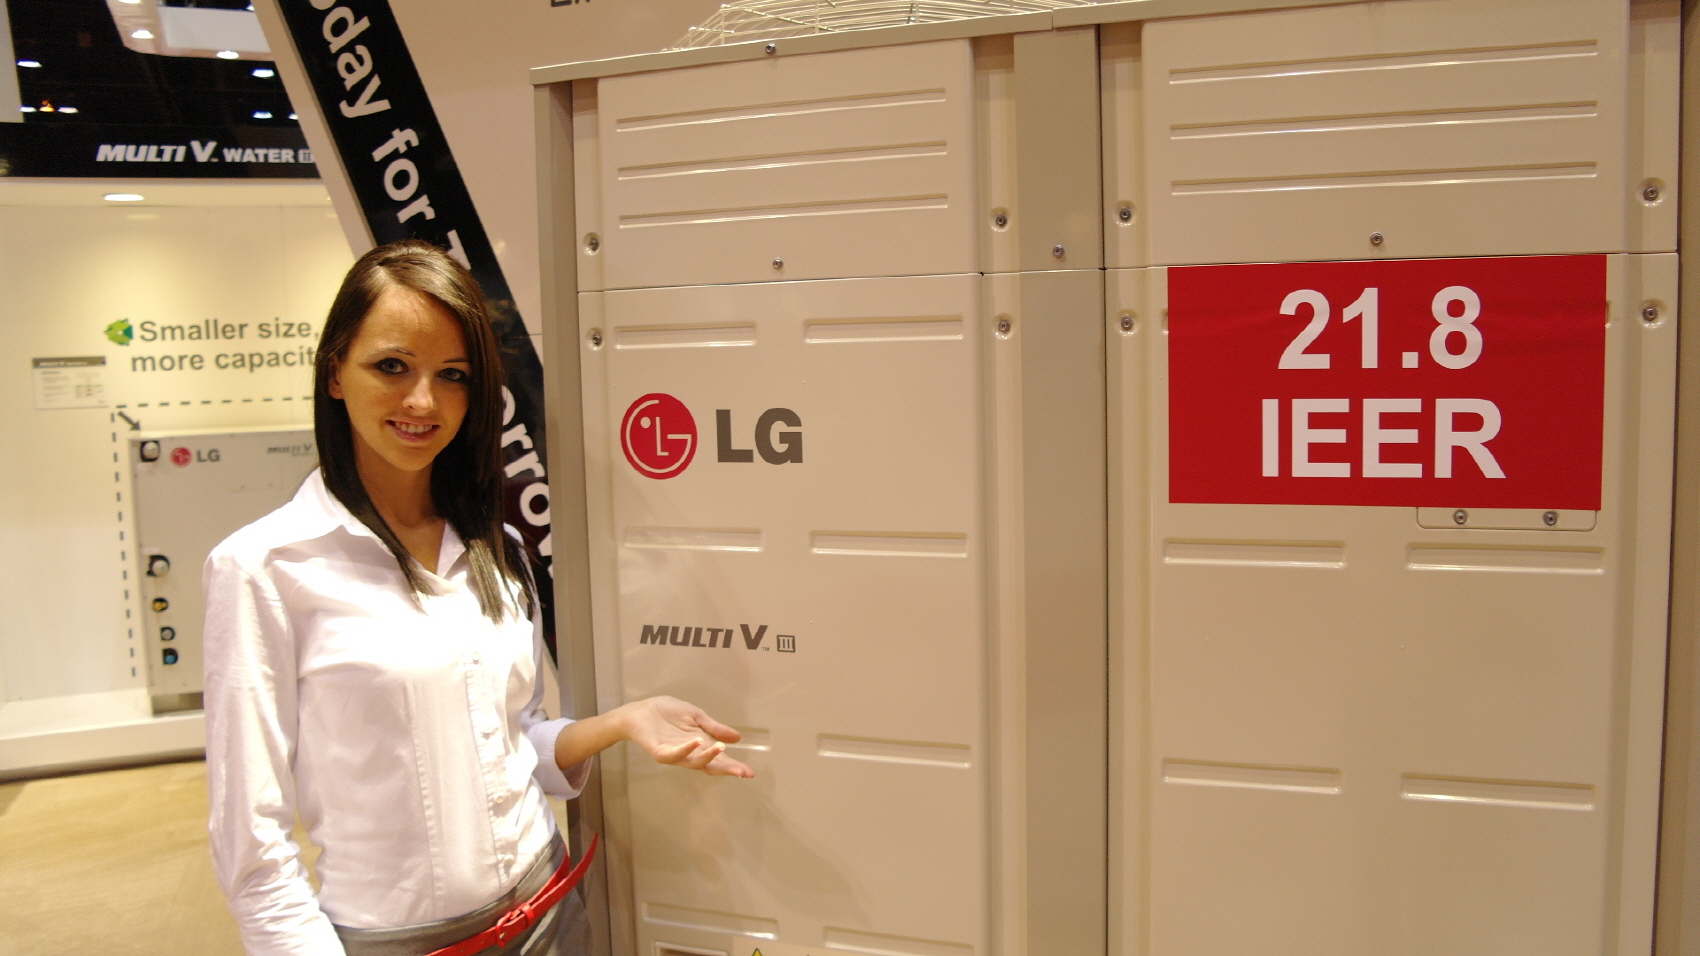 A woman posing in front of the LG Multi V III air conditioner